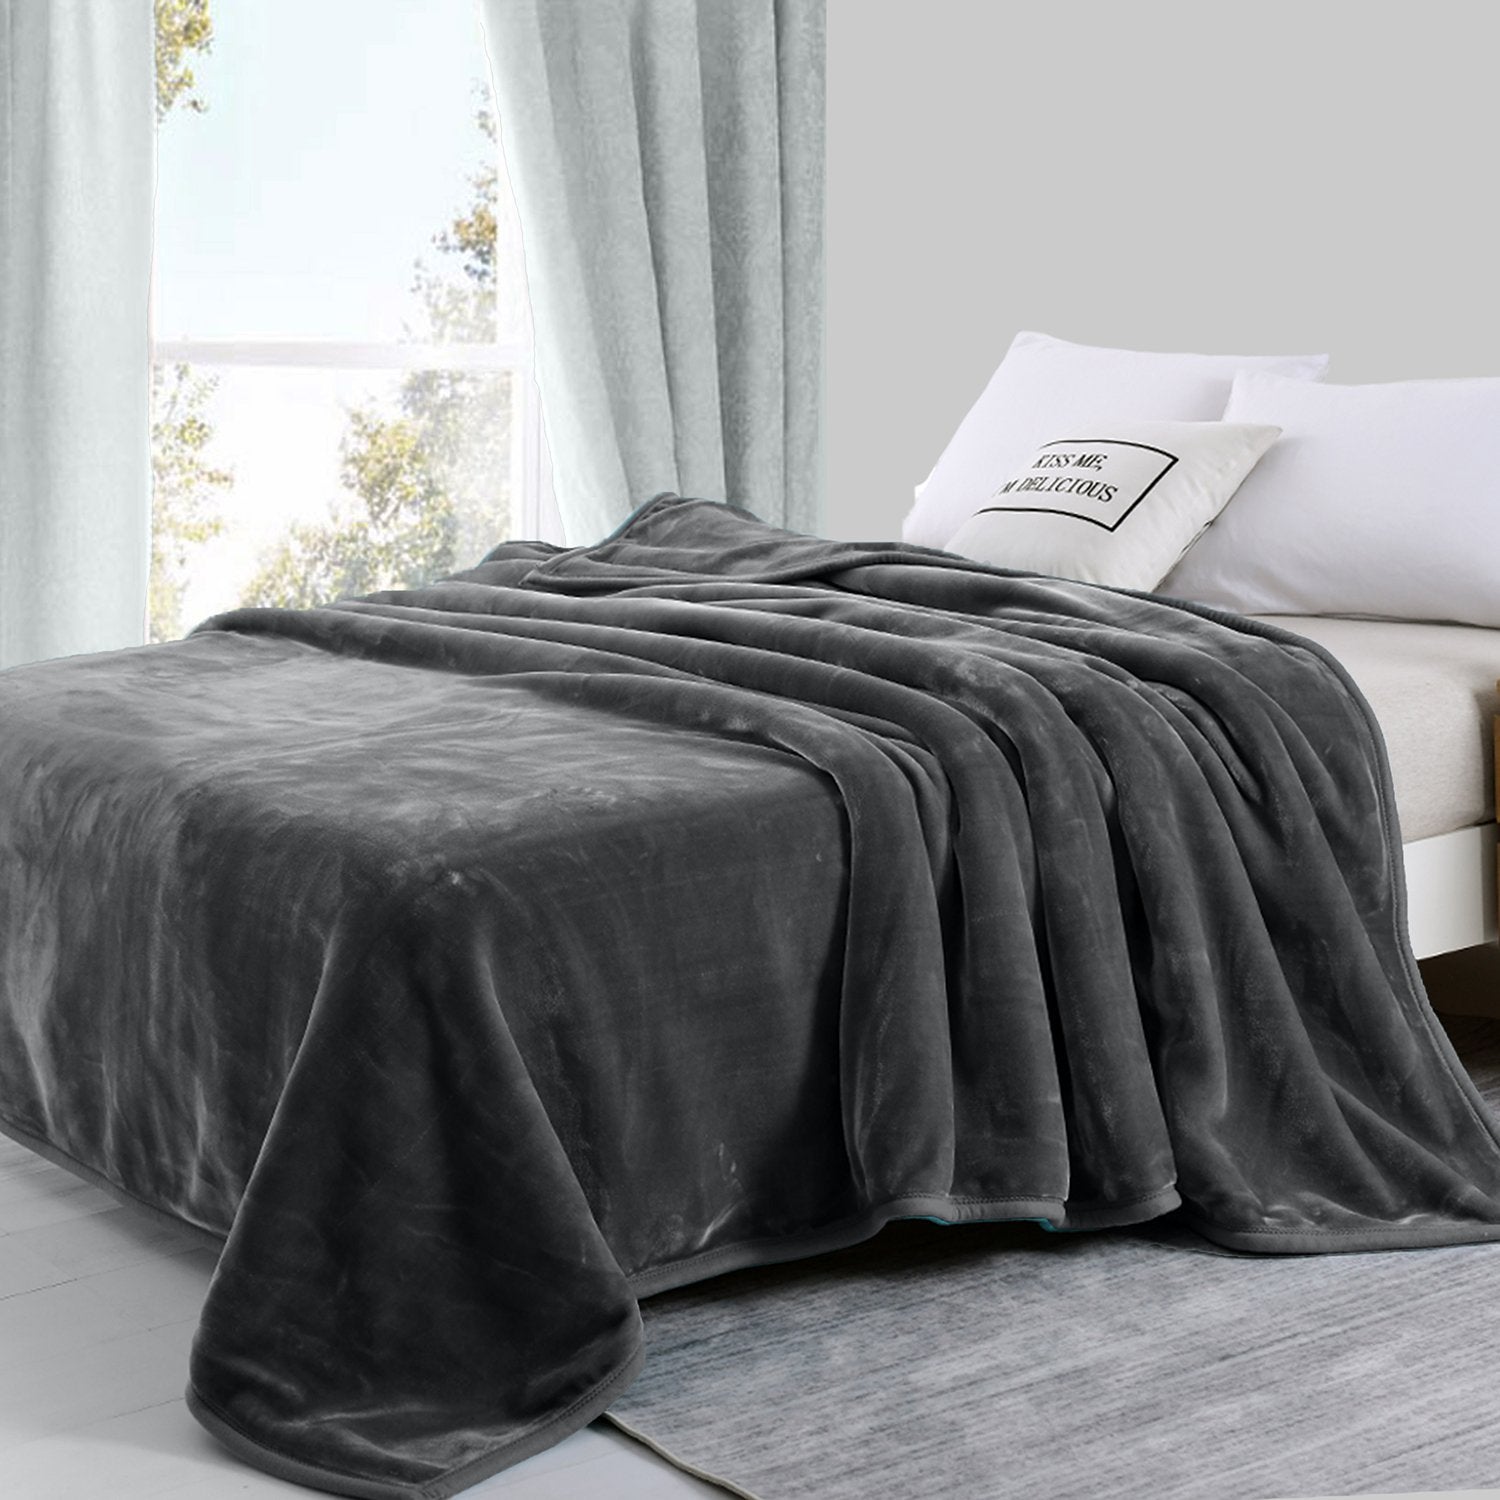 Two-Ply Mink Blanket 750GSM | Buy Throw Blankets - 887450